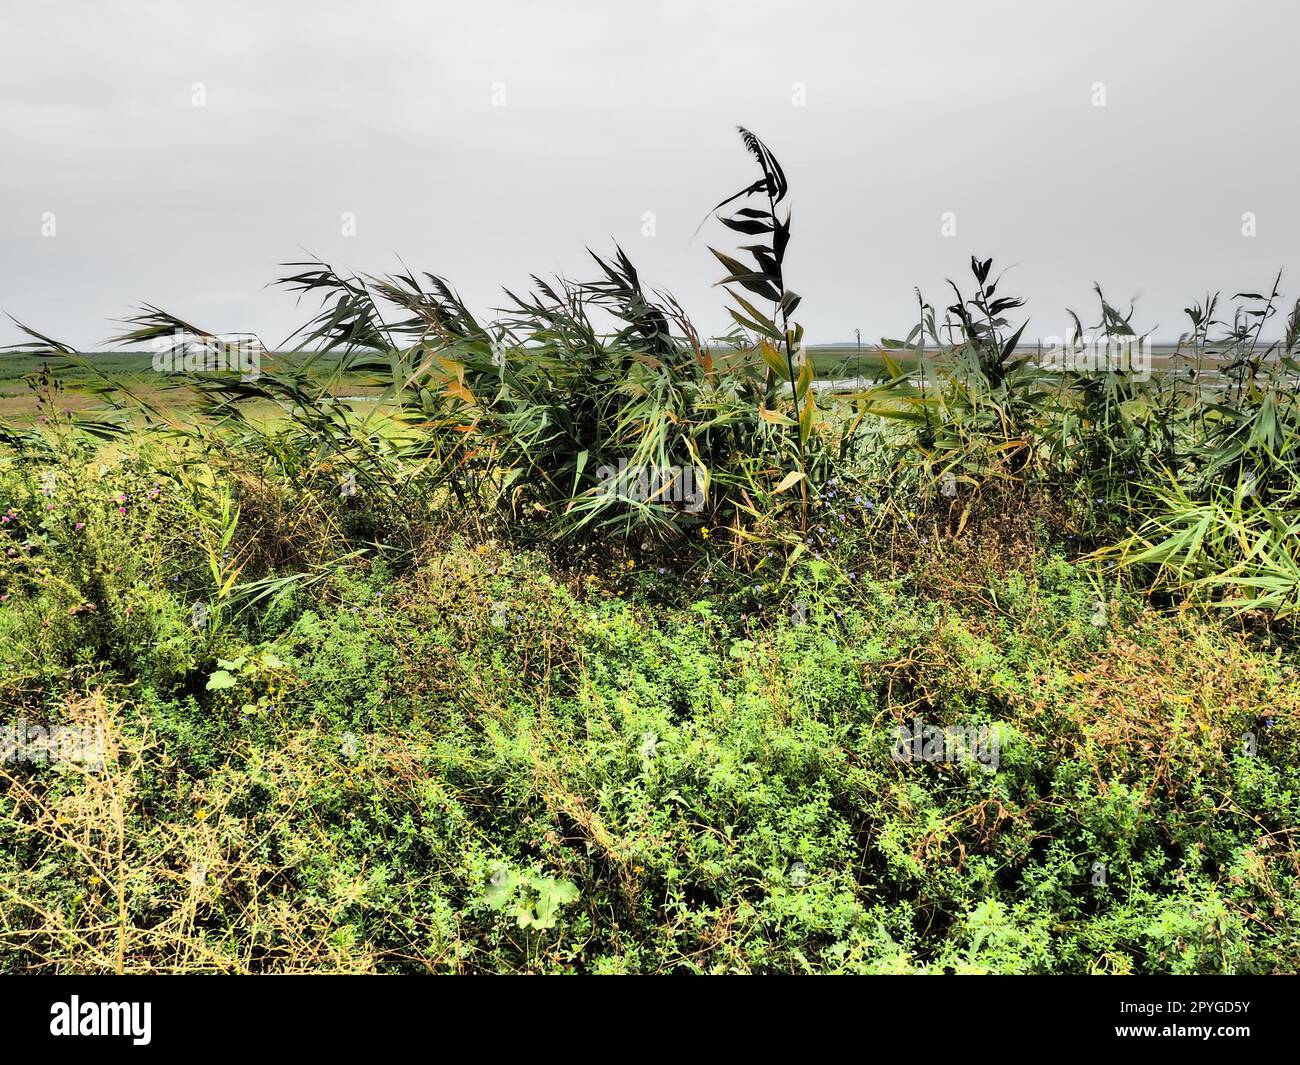 Common reed, or southern reed, Phragmites australis, a tall perennial grass of the genus Reed. Flora of the estuary. Moisture-loving plant. Soils with close standing groundwater. Stormy weather. Stock Photo